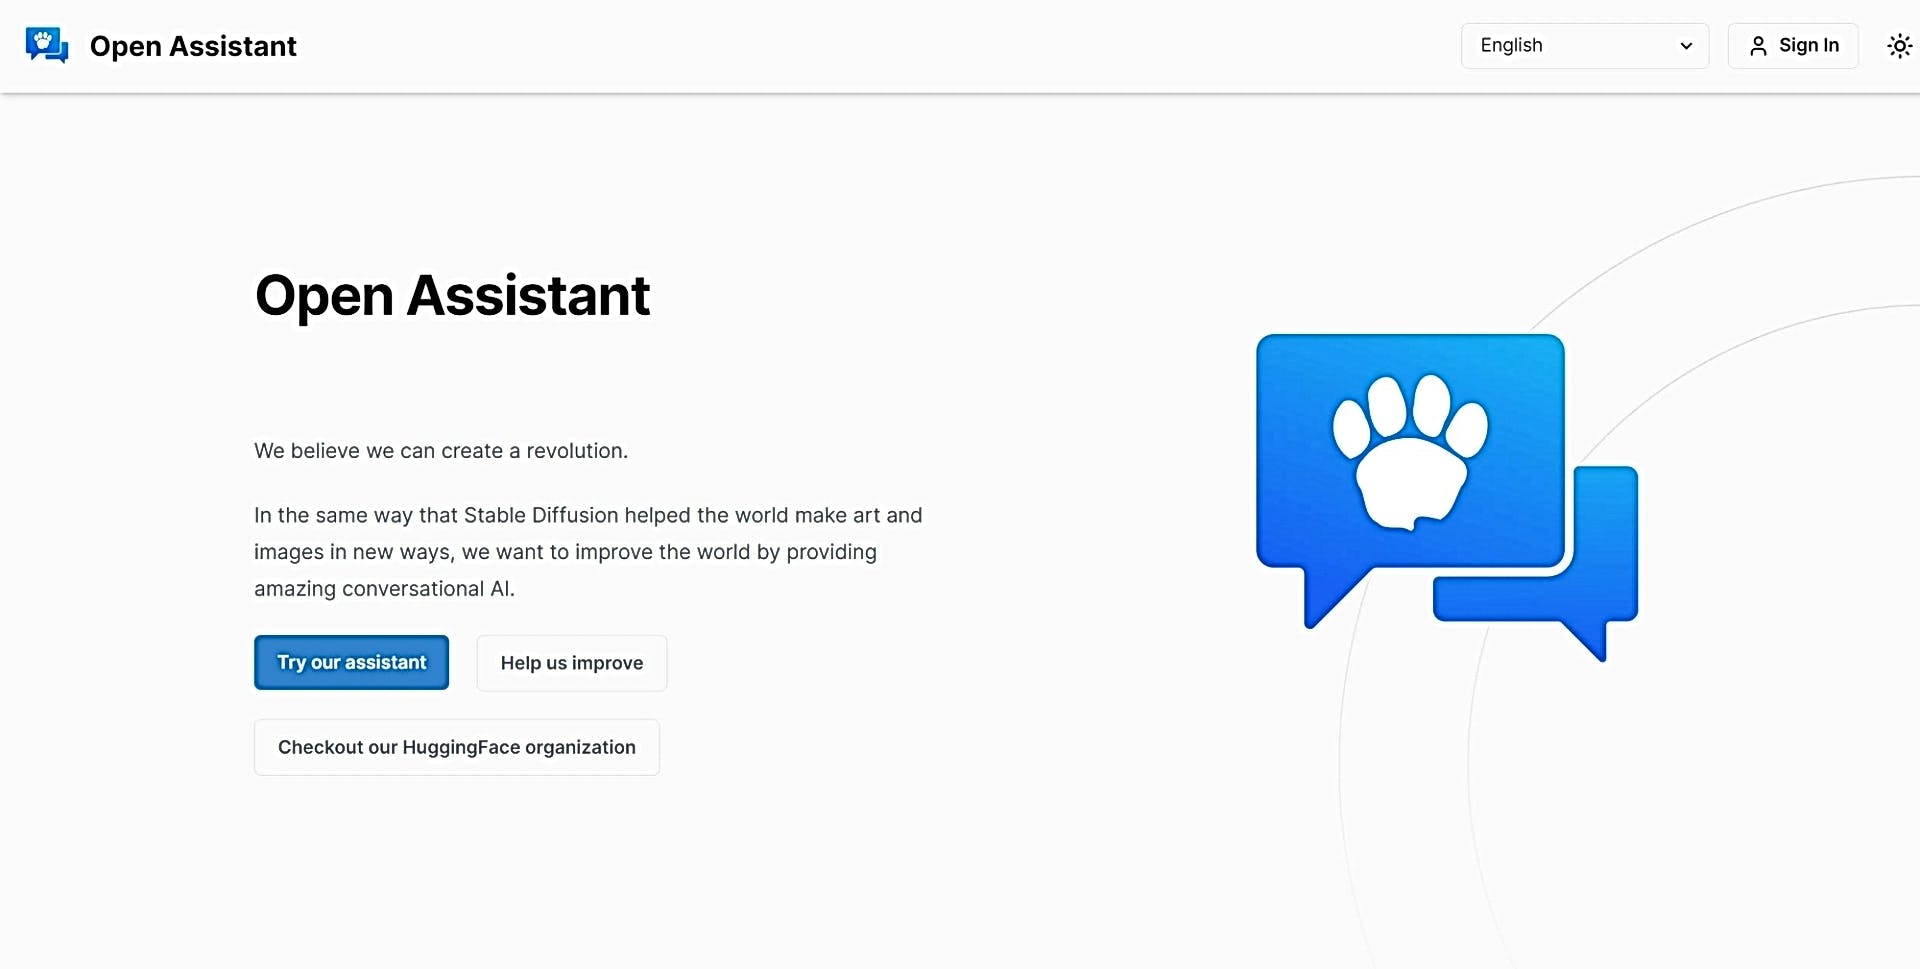 Open Assistant featured